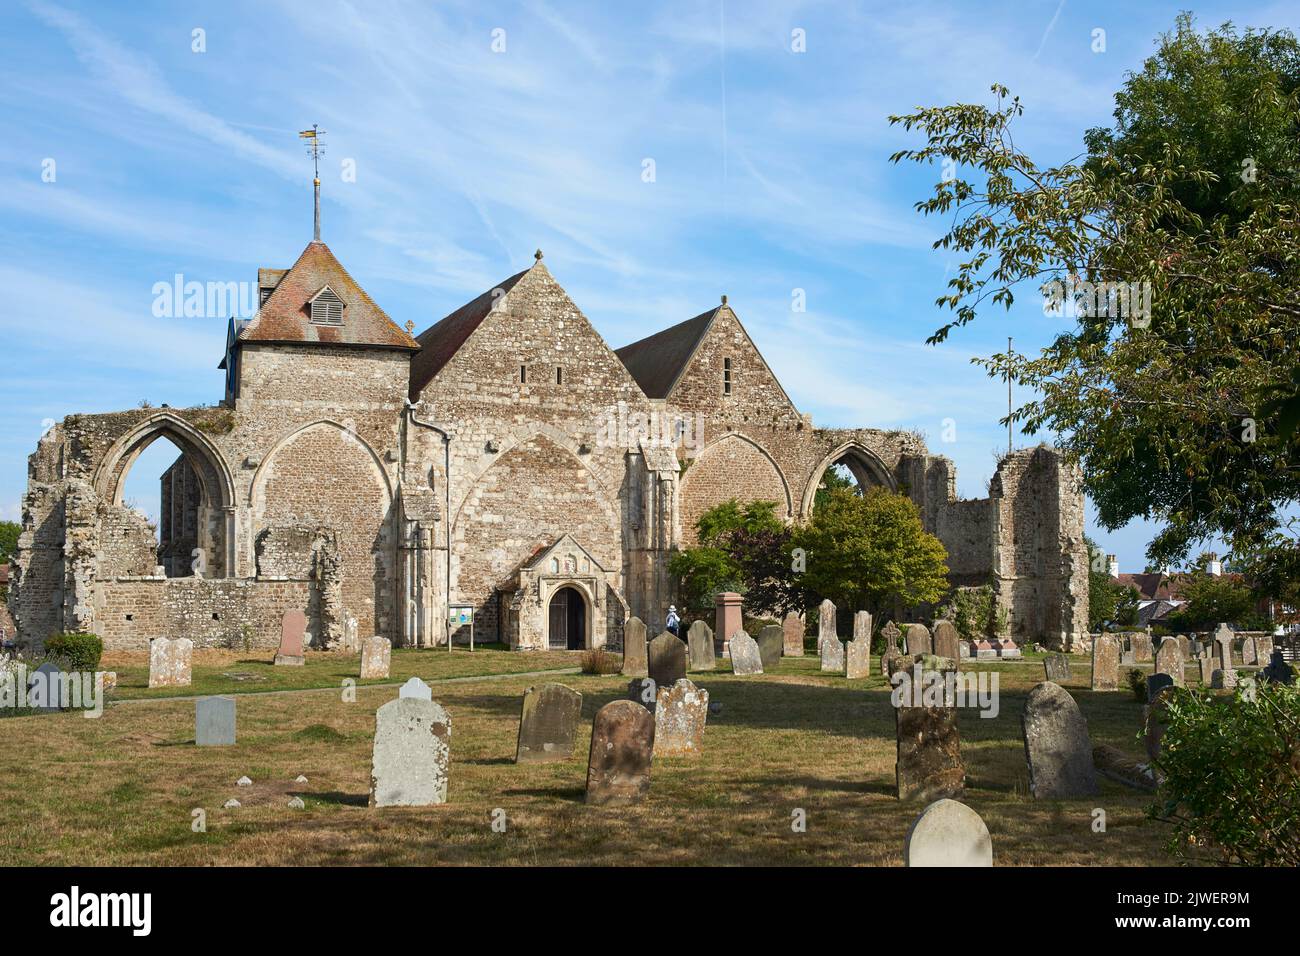 The 13th century church of St Thomas the Martyr at Winchelsea, East Sussex, South East England Stock Photo